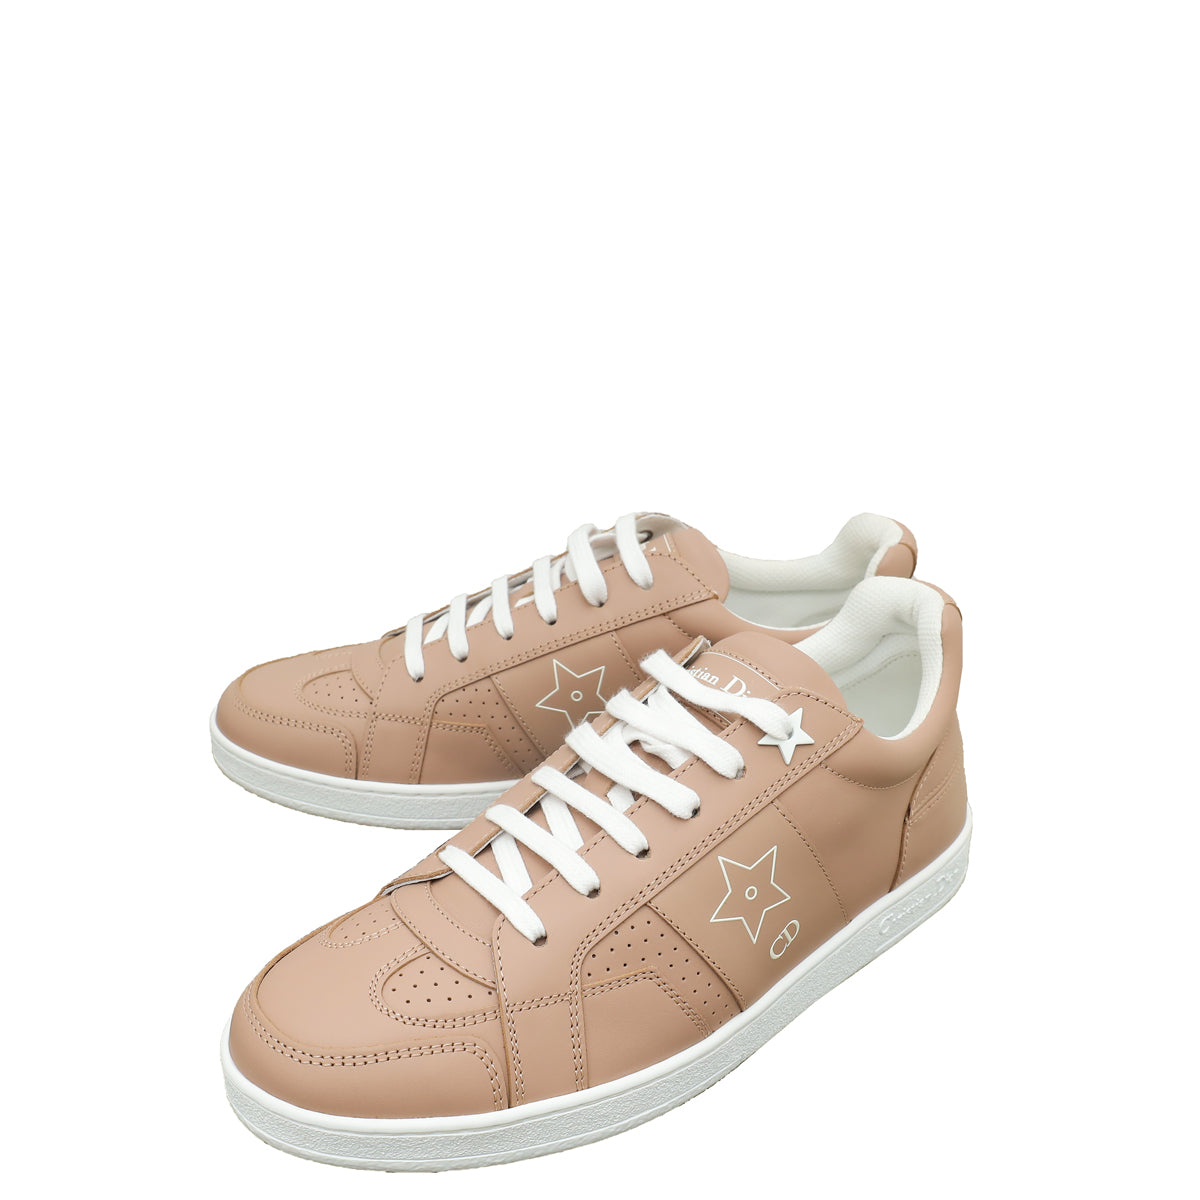 Christian Dior Dusty Pink Star Sneaker 37